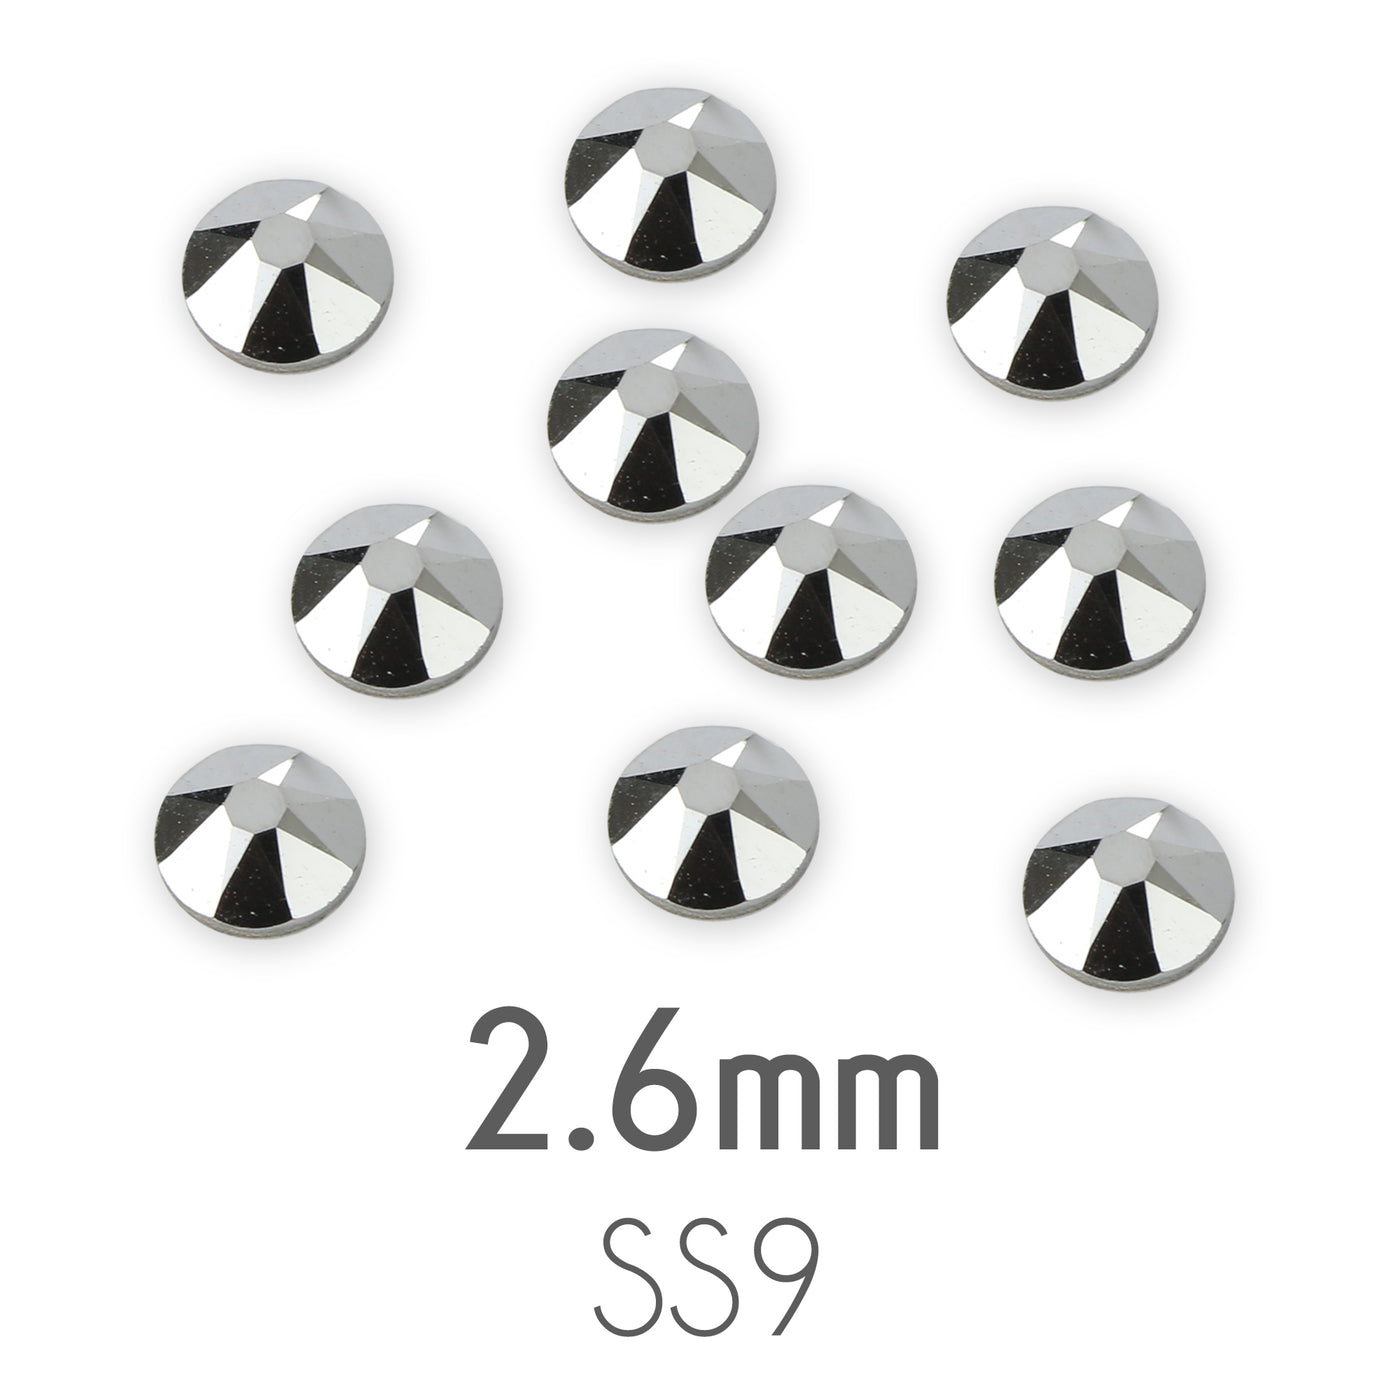 2.6mm Swarovski Flat Back Crystals, Silver / Chrome, Pack of 20 –  Beaducation